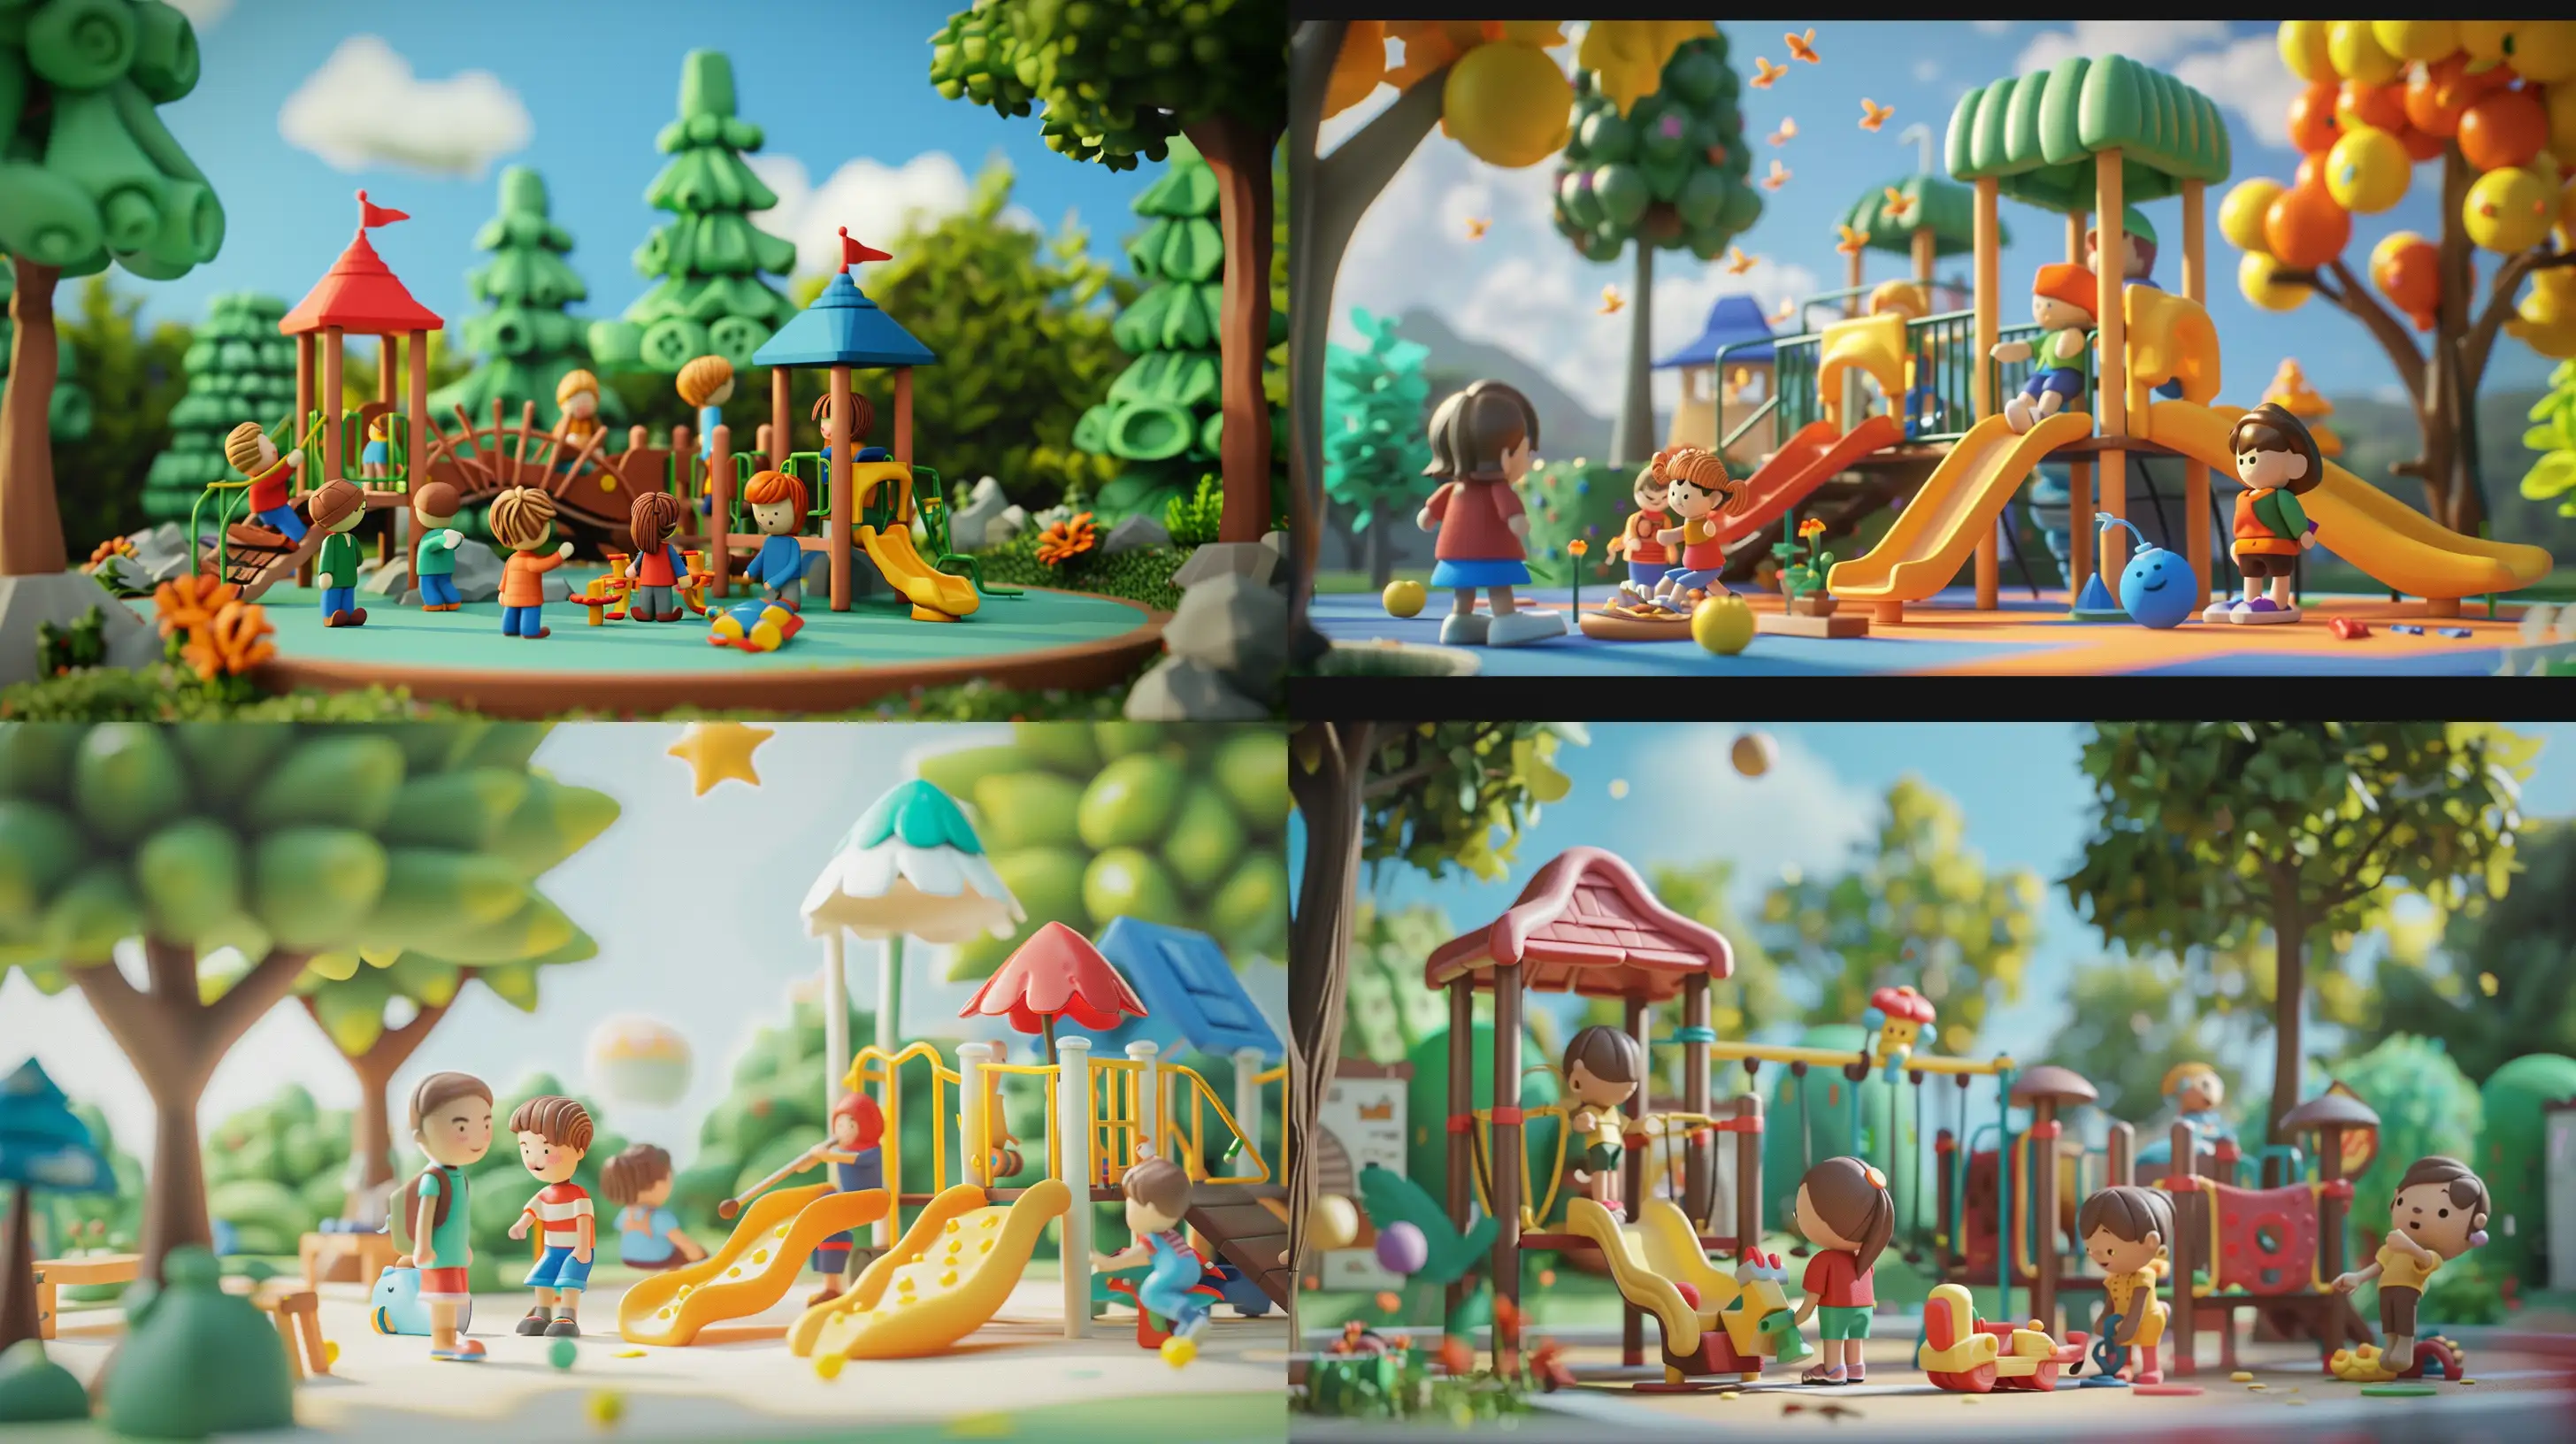 Vibrant-Clay-Animation-Childrens-Day-Playground-Fun